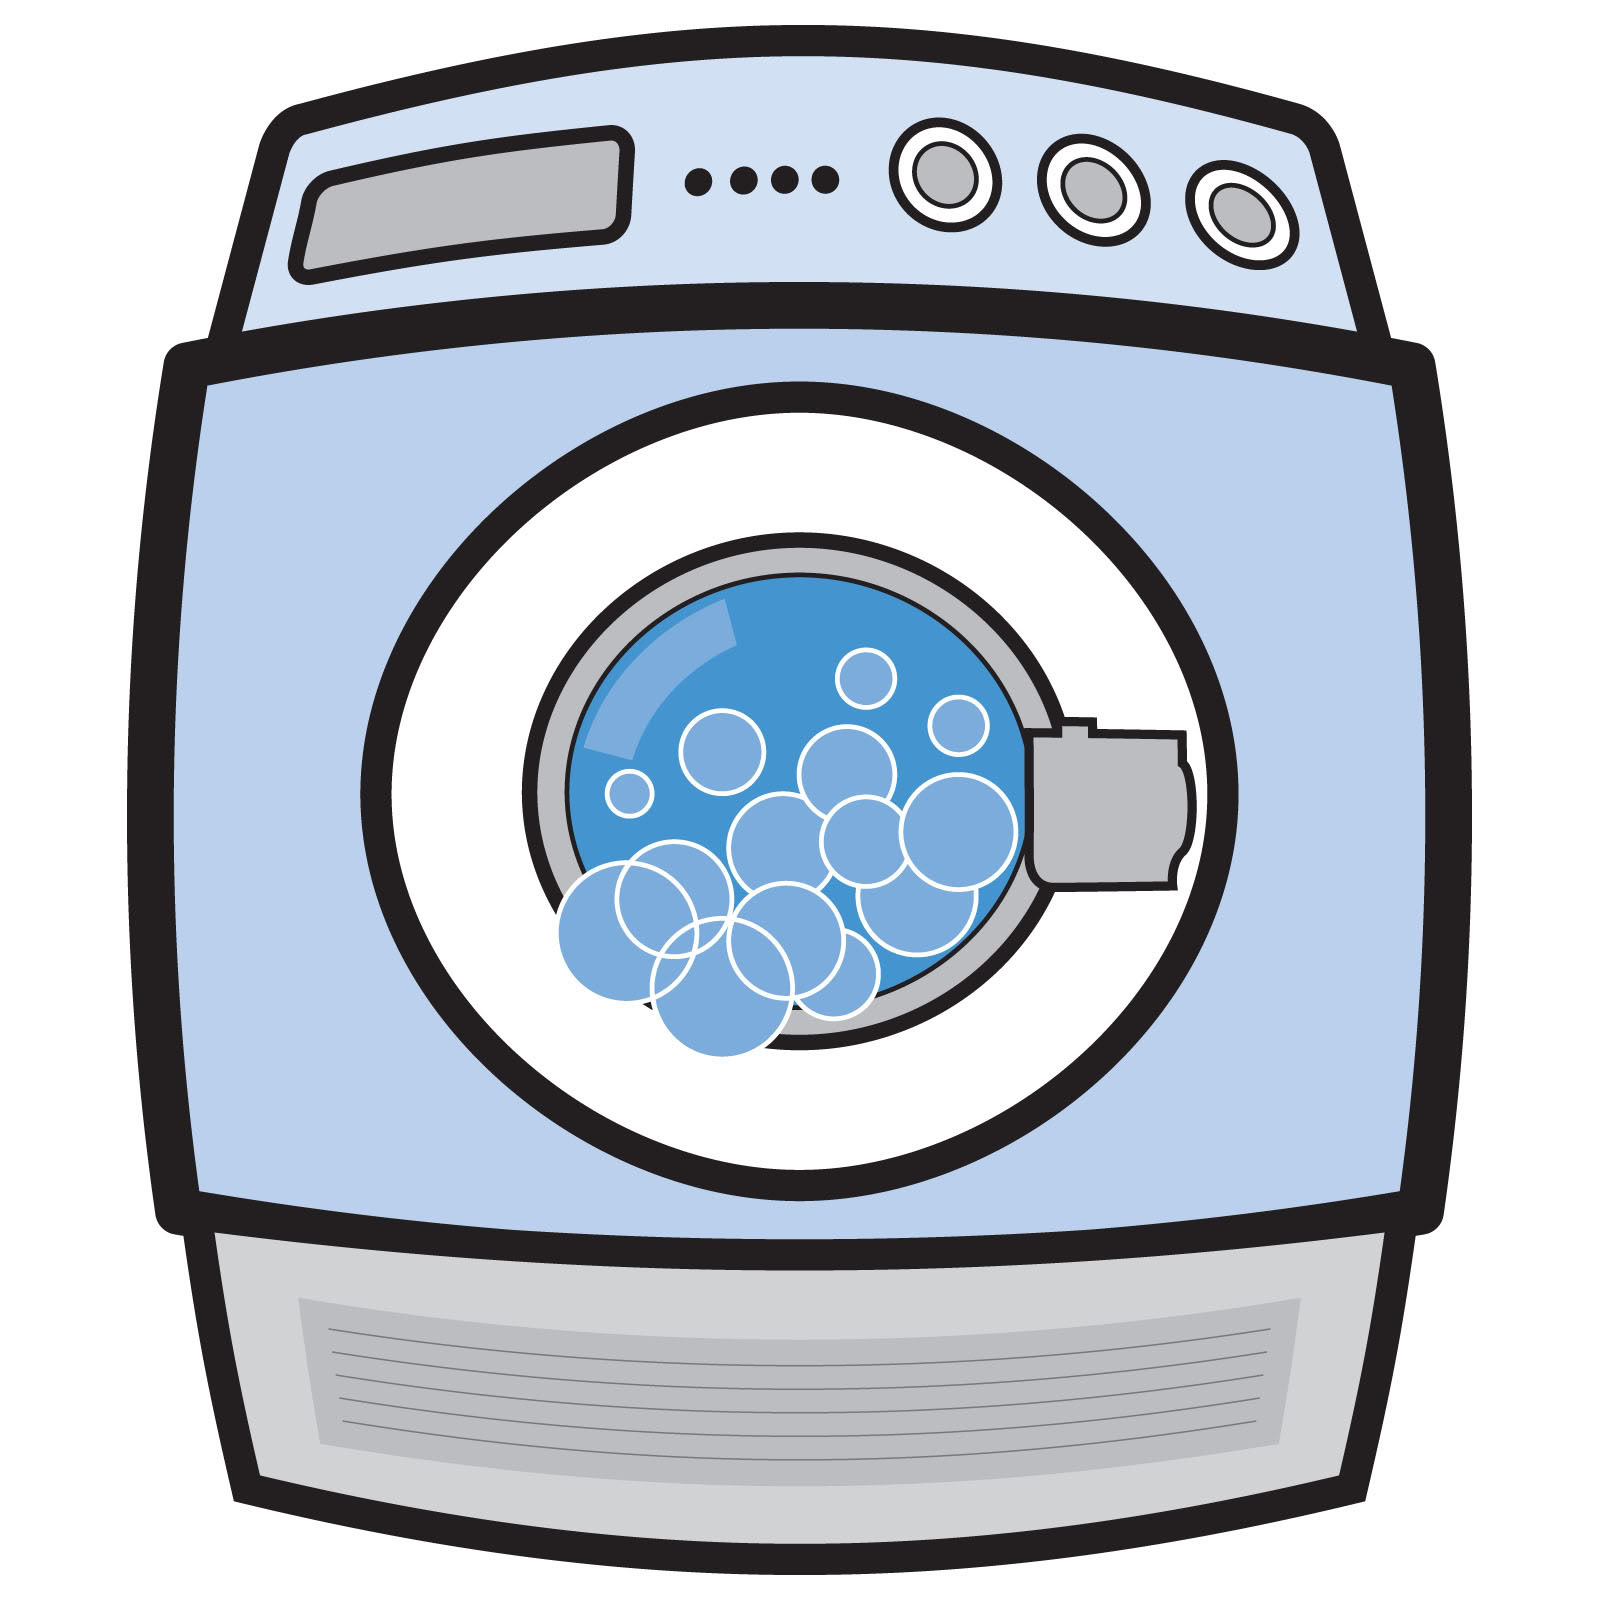 How To Ensure Your Washing Machine Smells As Fresh As The Day It Was